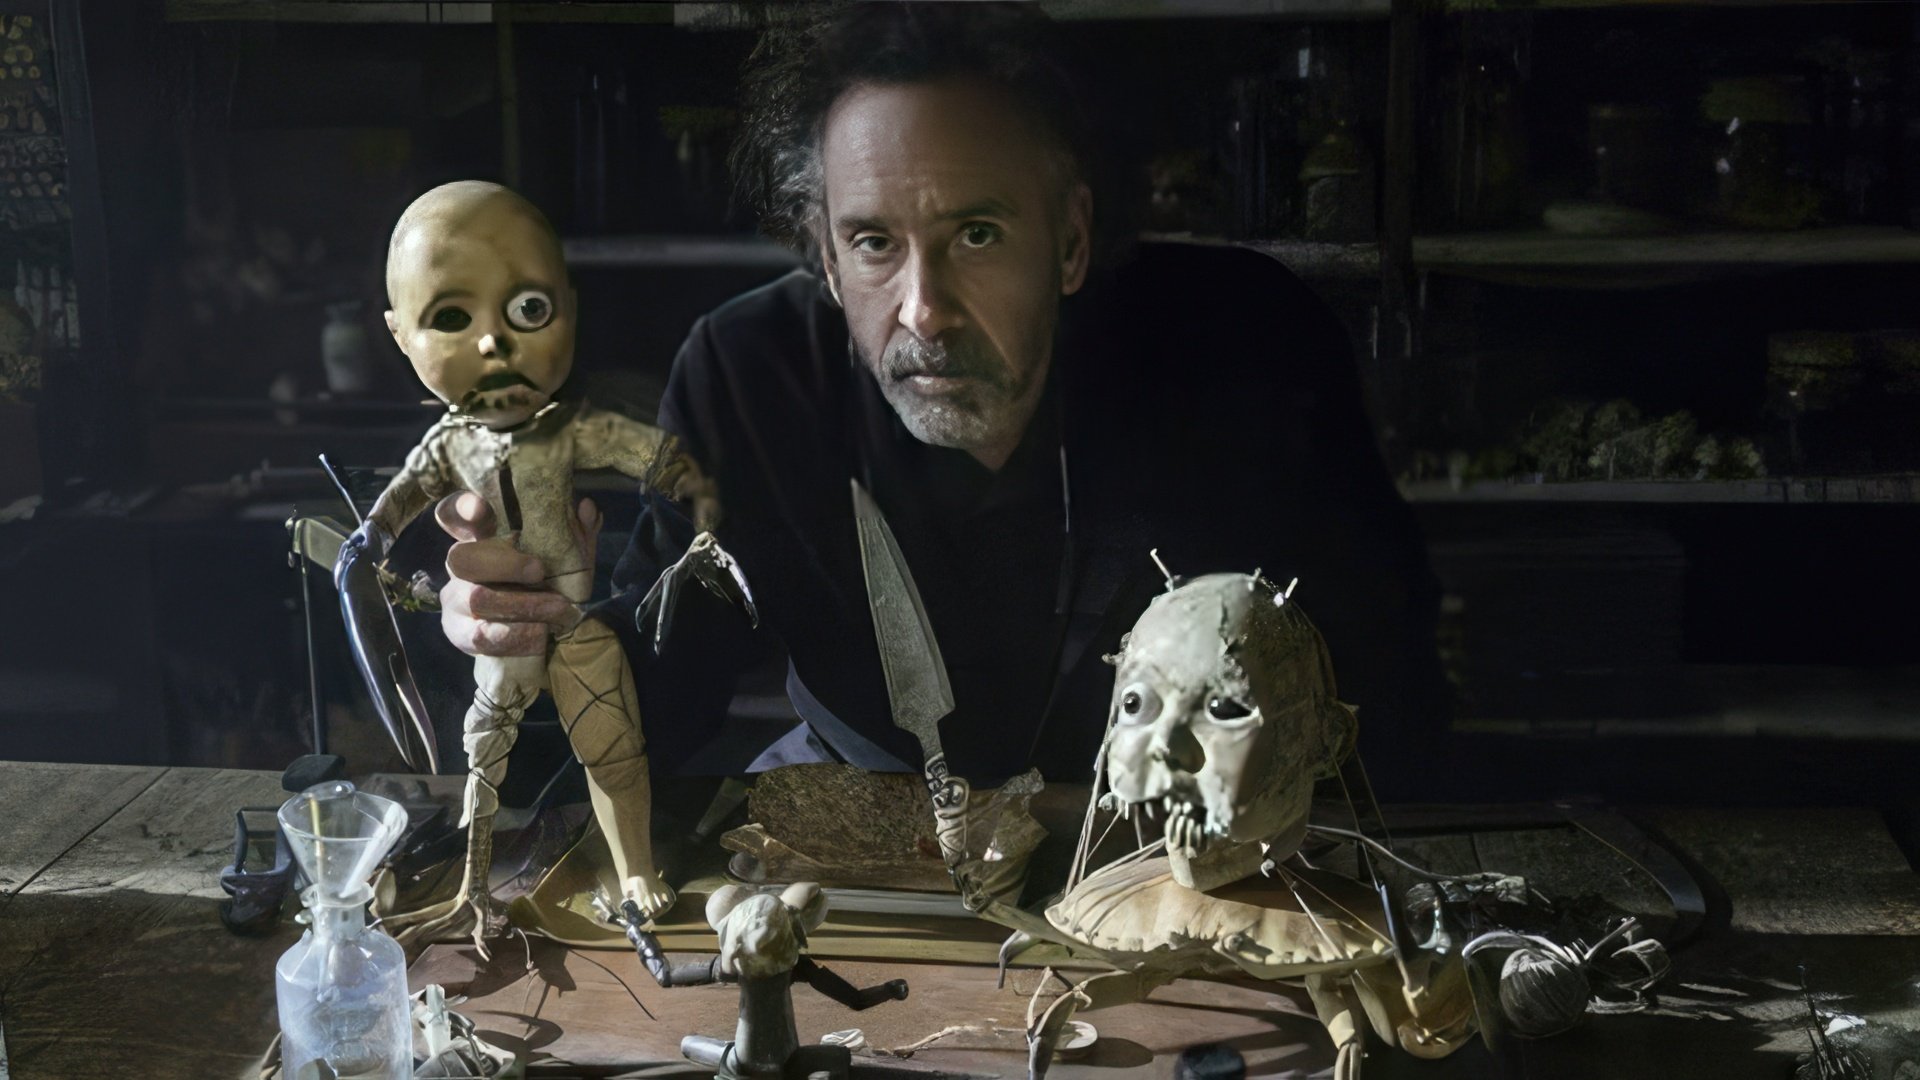 Tim Burton on the set of Miss Peregrine’s Home for Peculiar Children